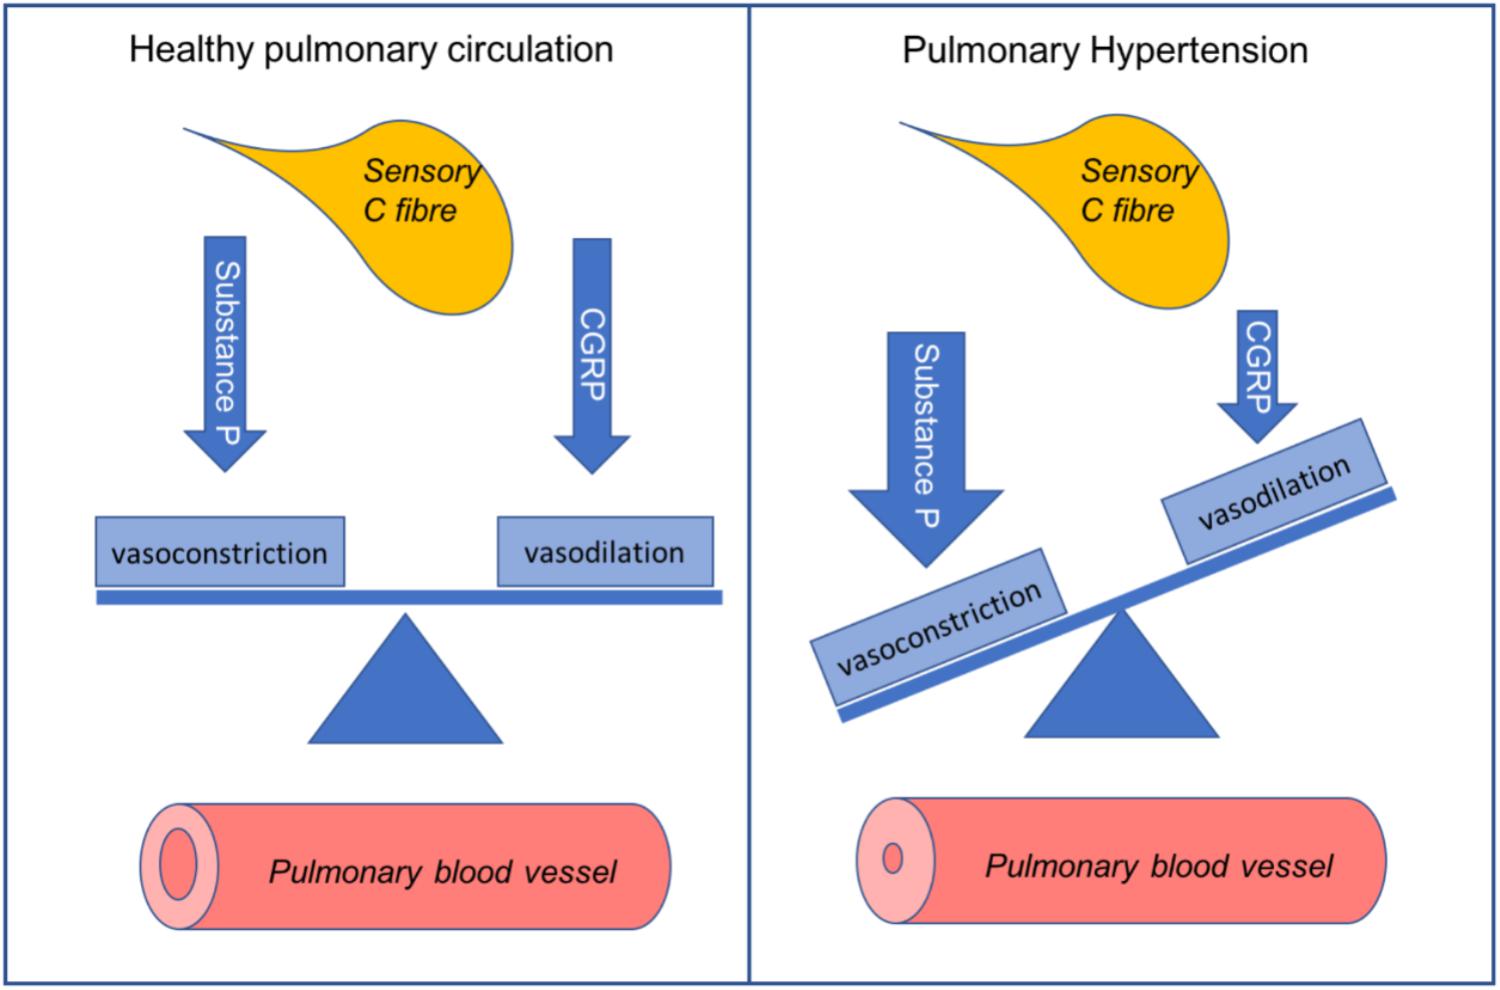 Frontiers | Regulation of Pulmonary Tone by Neuropeptides and the Implications for Pulmonary